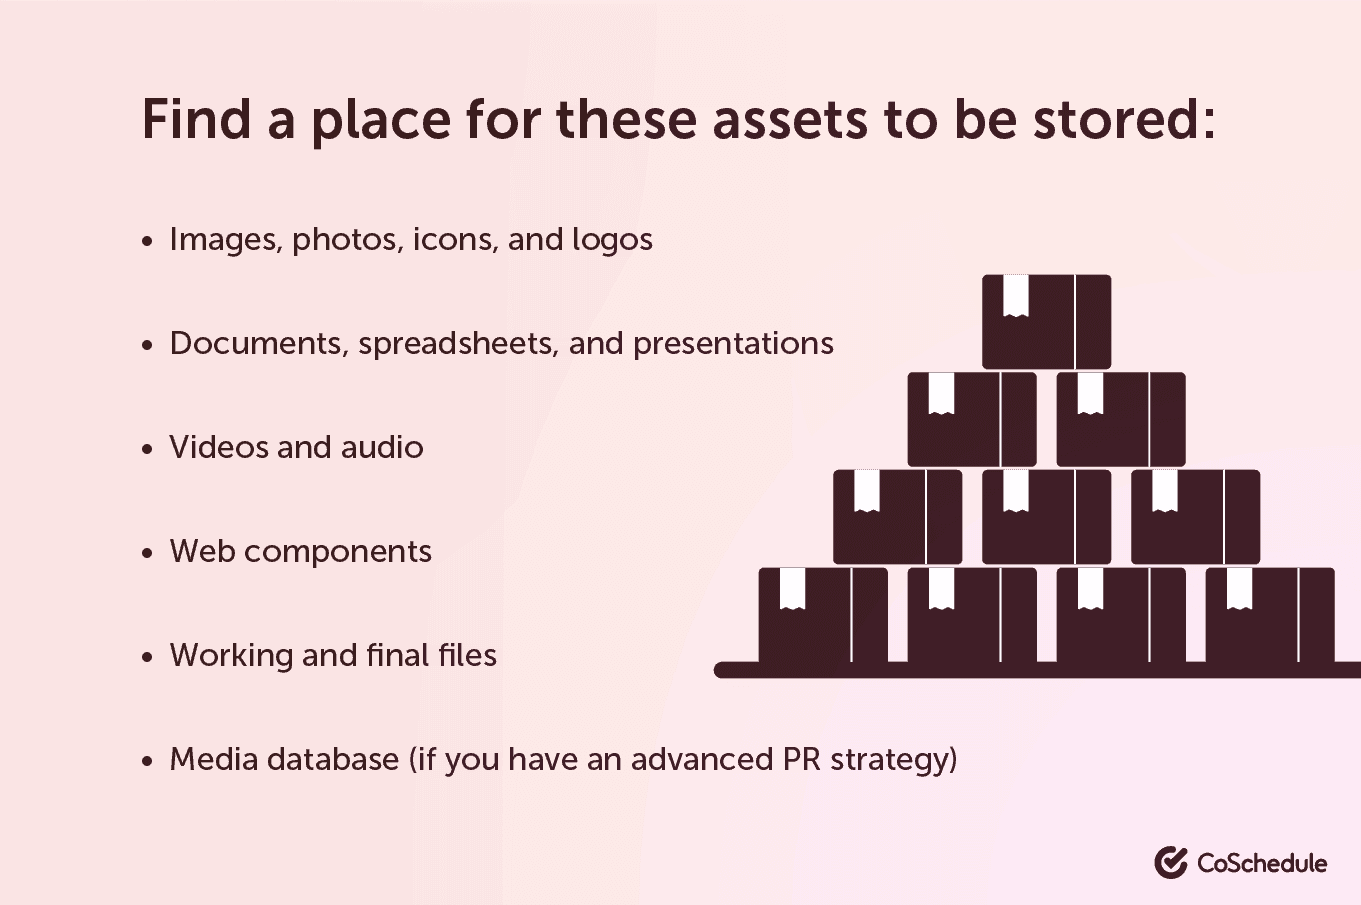 Find a place to store your assets